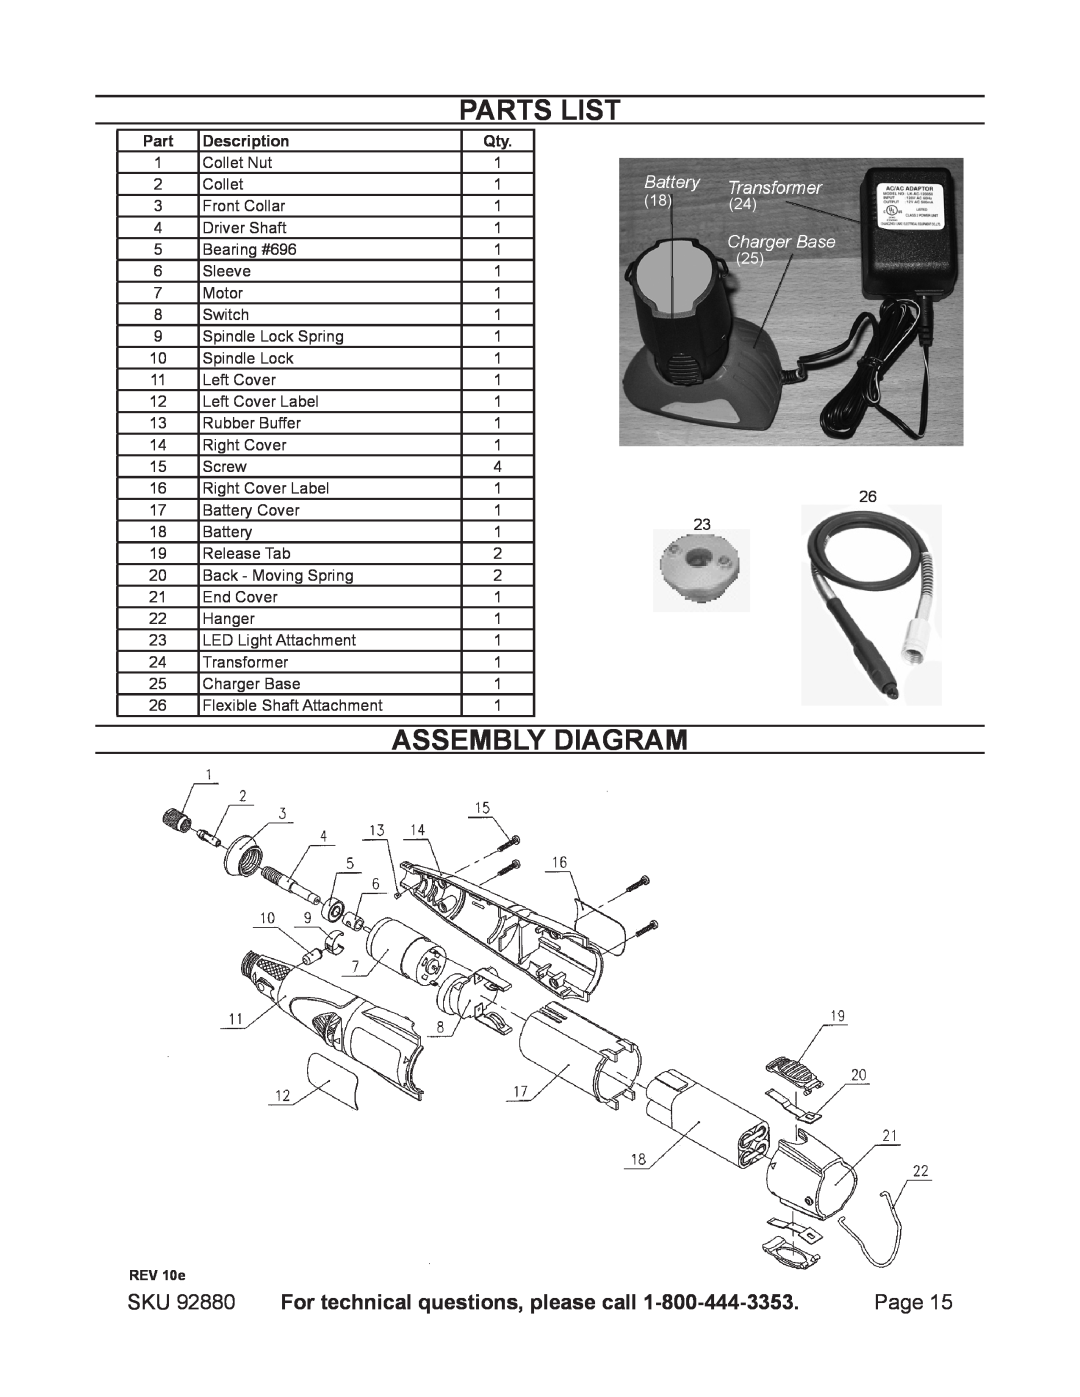 Chicago Electric 92880 operating instructions Parts List, Assembly Diagram, Description 